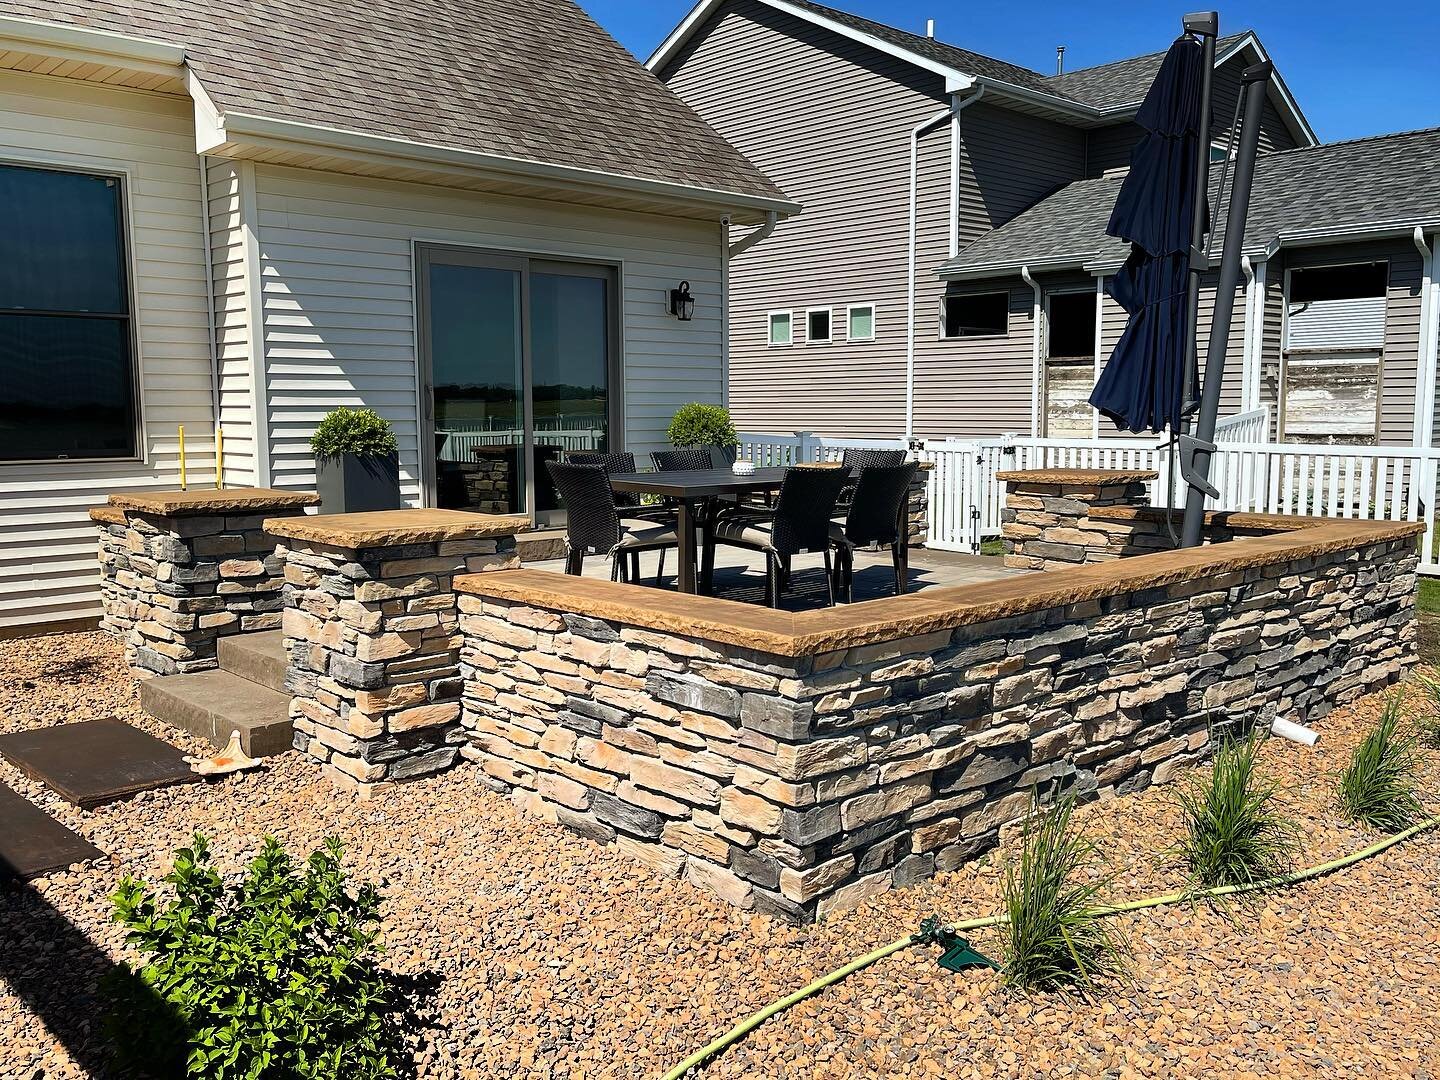 Dreaming of Summer days ☀️and warmer temps on this bitterly cold day! 🍹🏝

#cantwaitforsummer #patio #hardscapelife #techopro #veneerstone